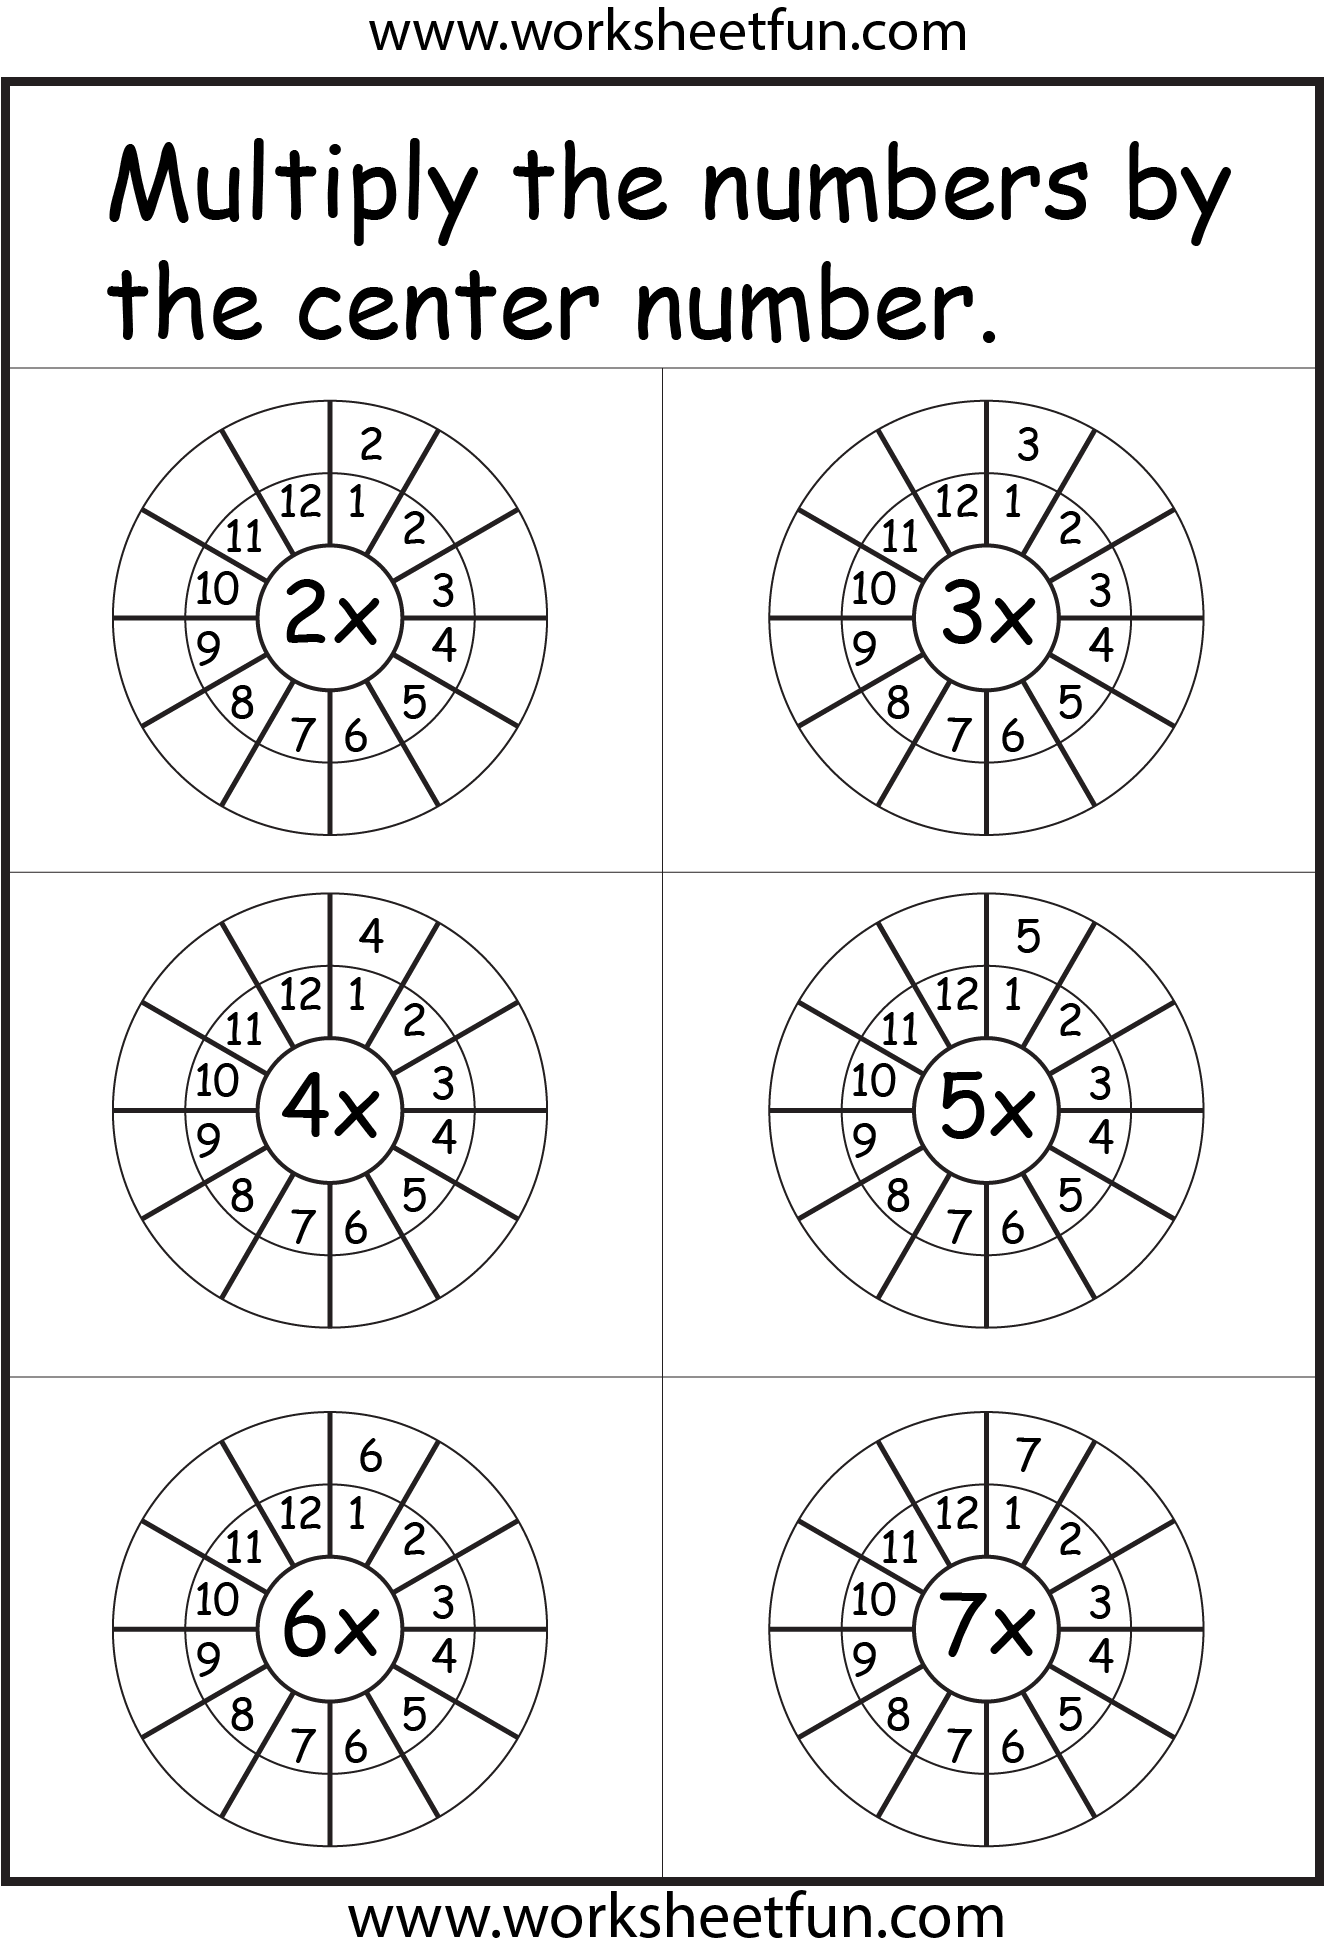 times-tables-worksheets-printable